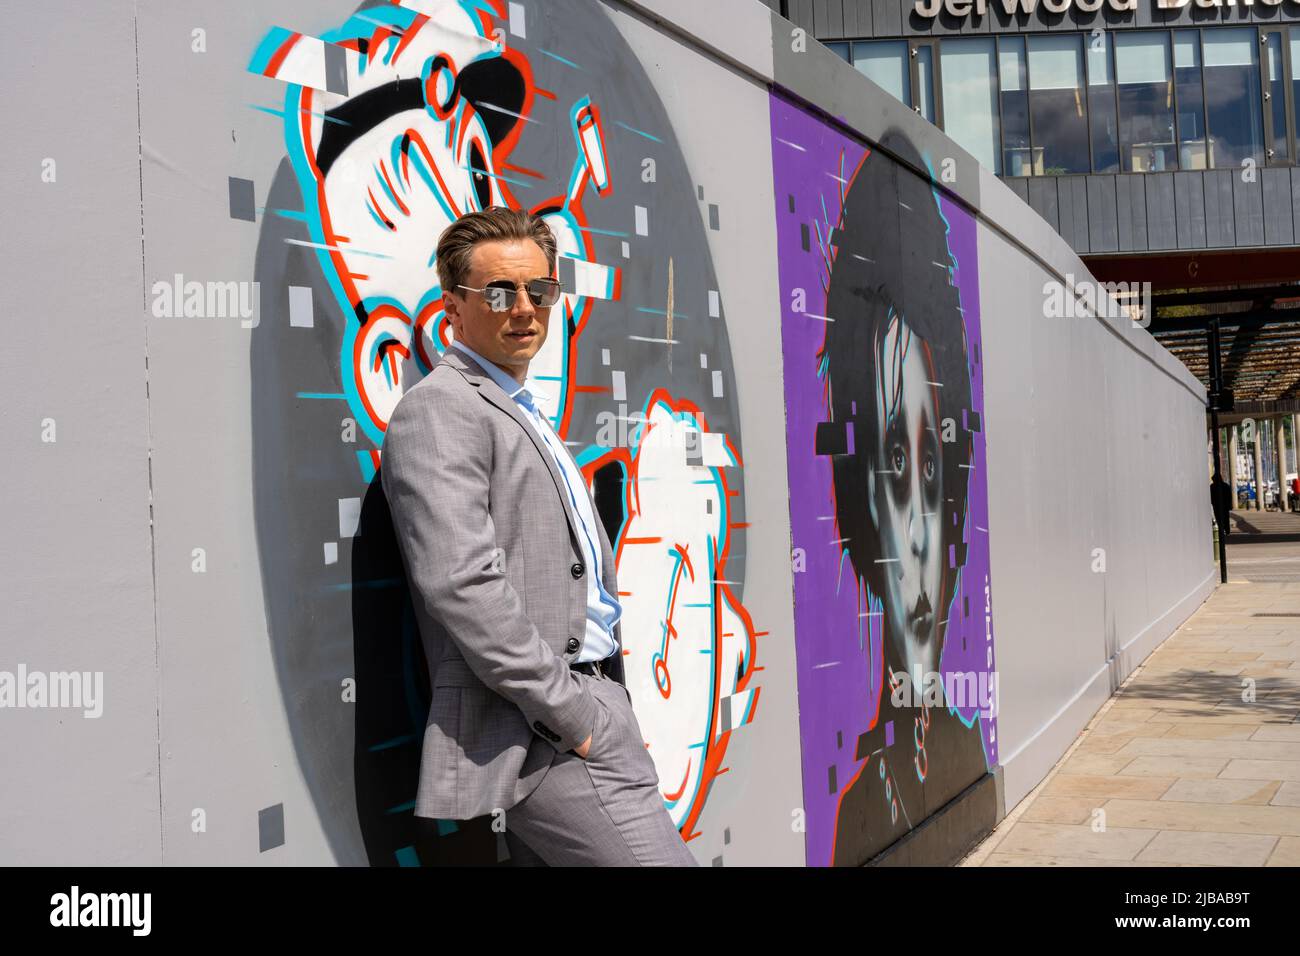 Ipswich Suffolk UK May 27 2022: A handsome businessman in a grey suit in front of some urban artwork Stock Photo